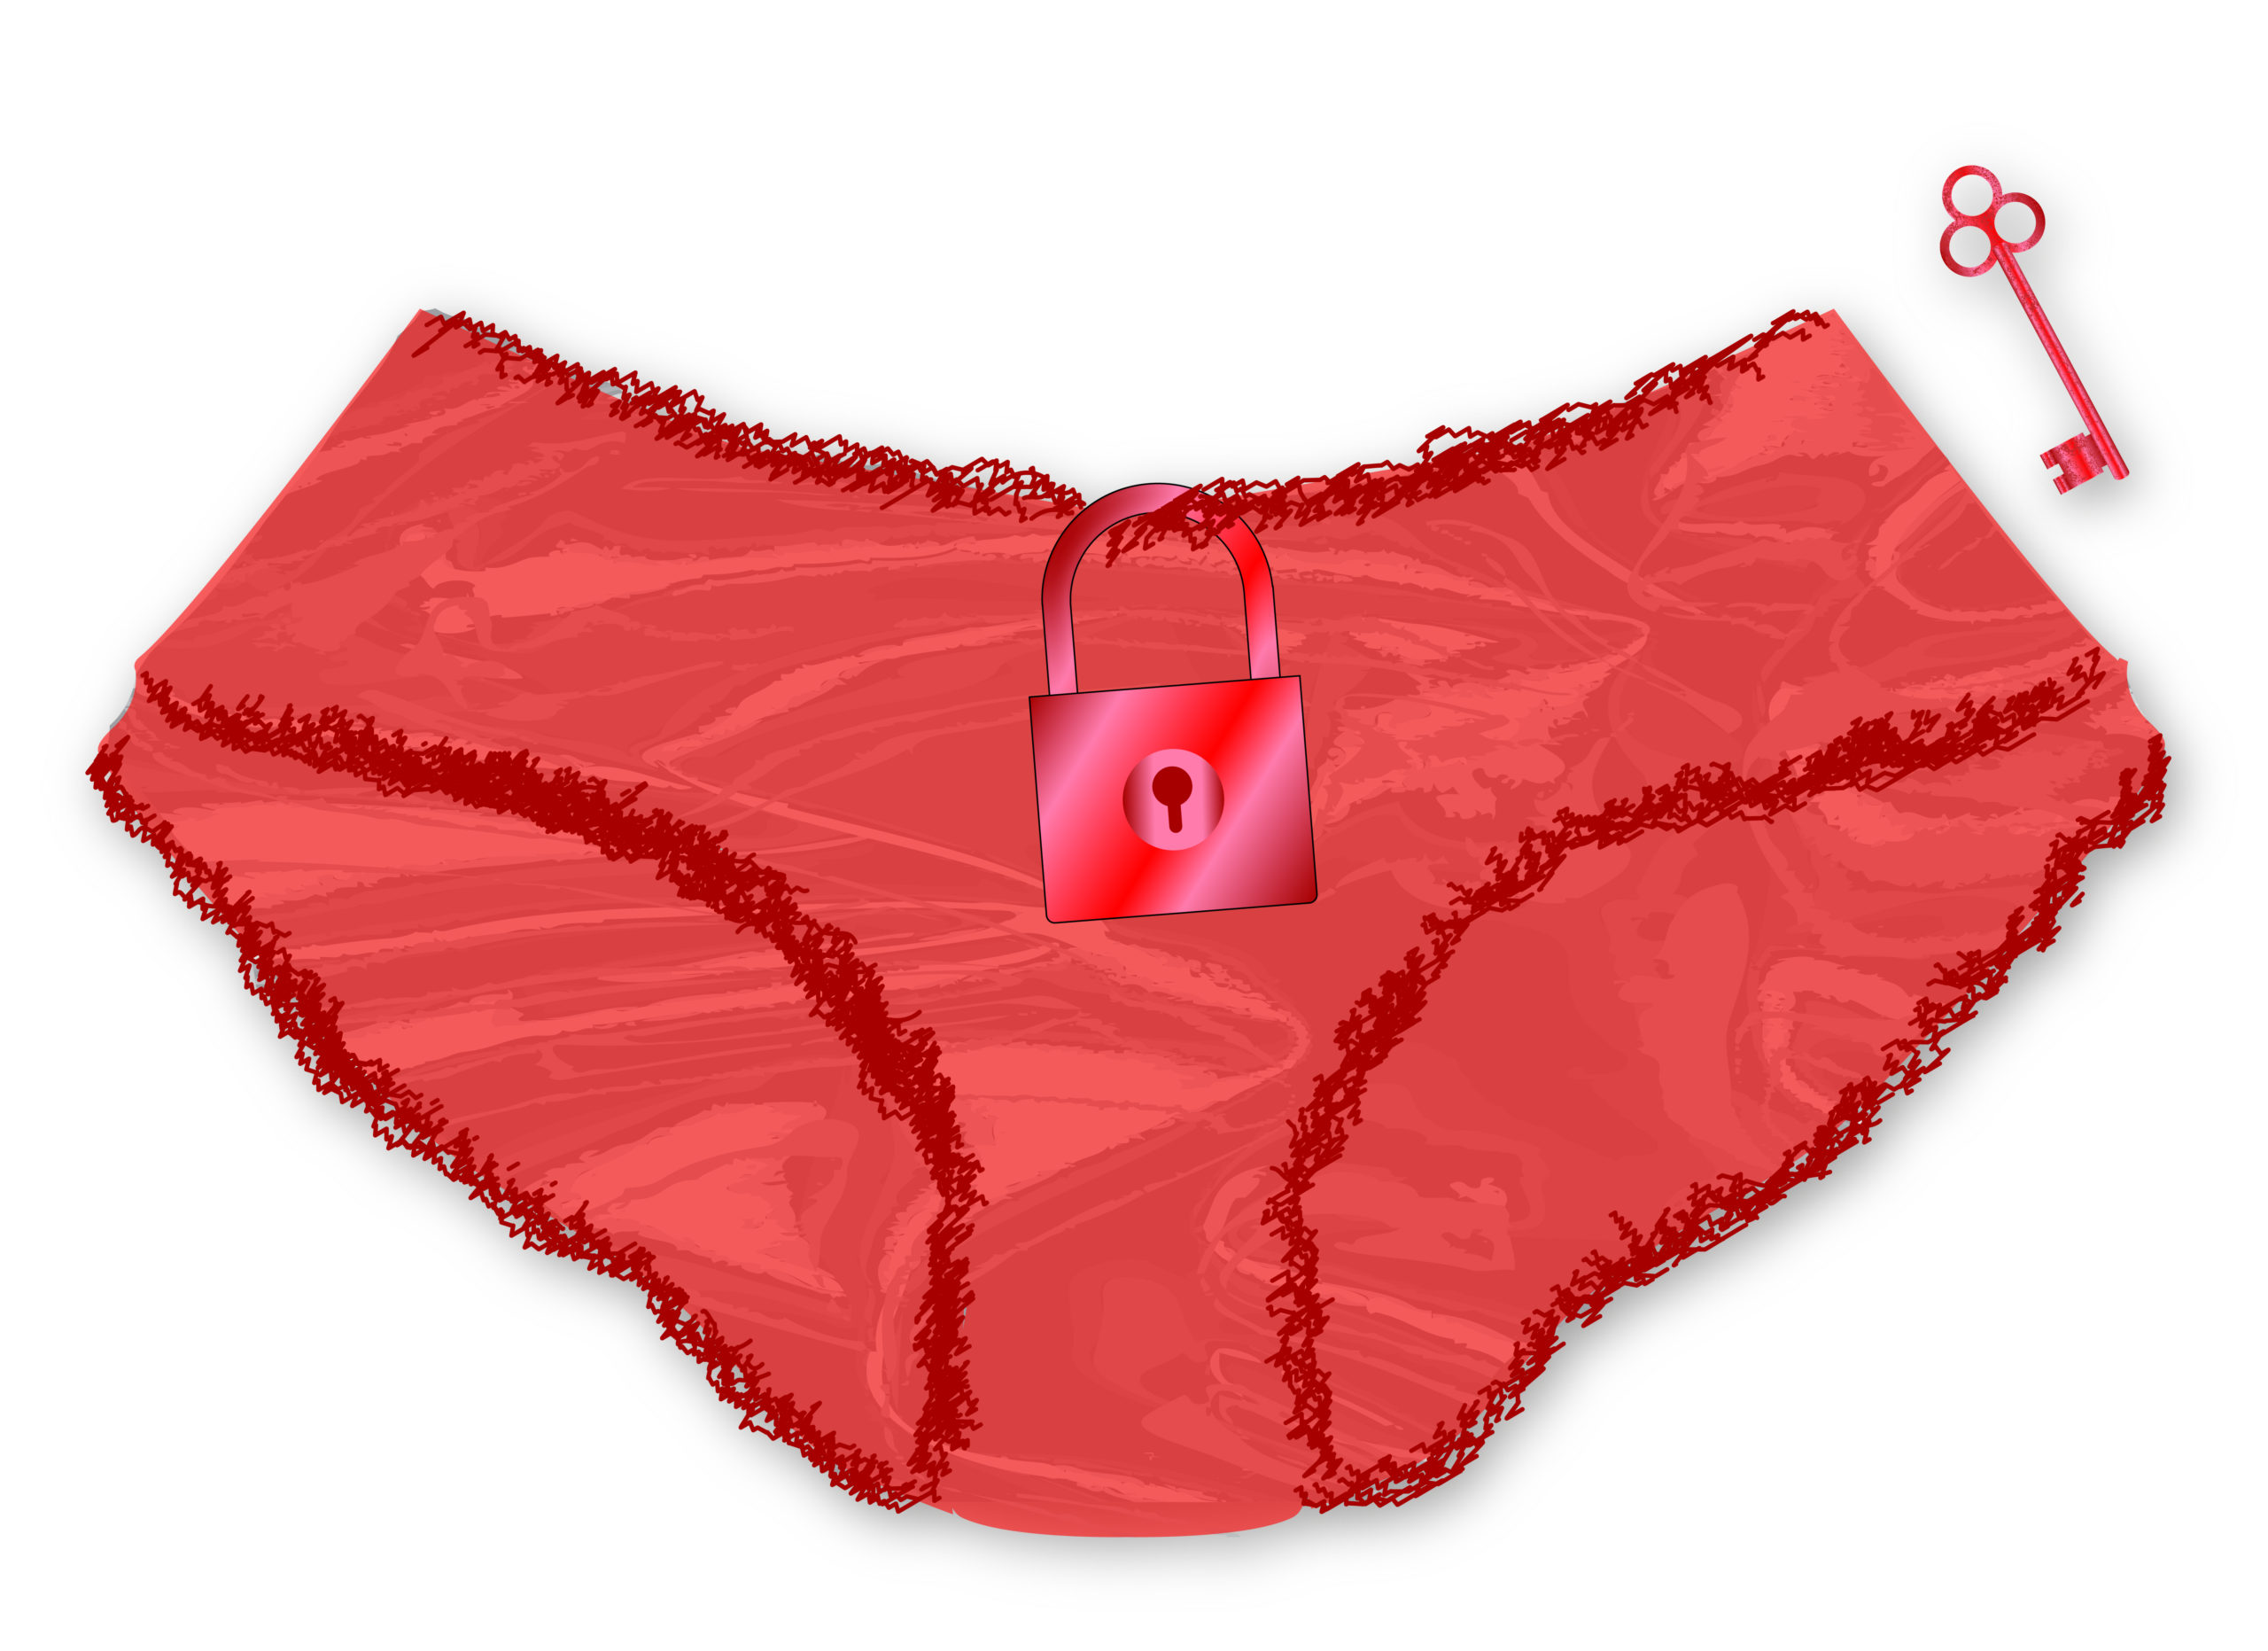 How to Panty Train Your Man in Chastity